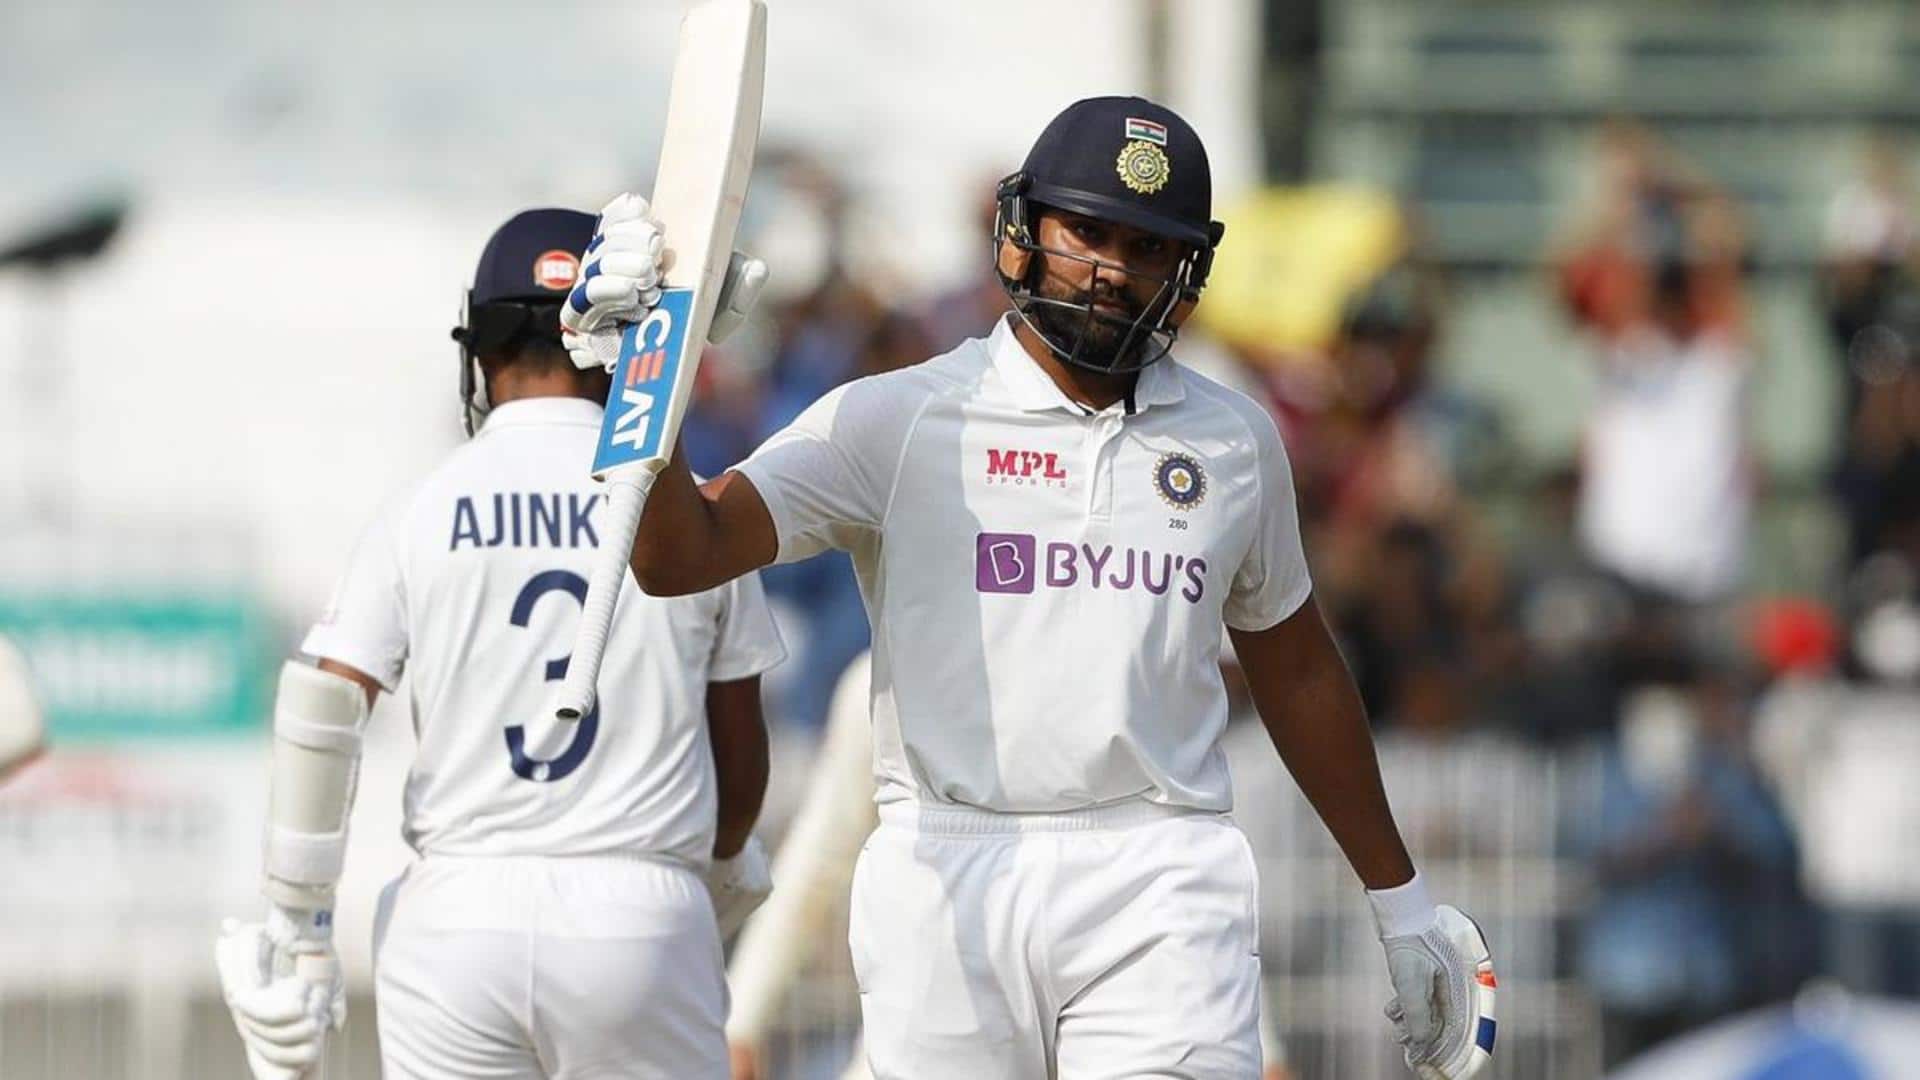 ICC Test Rankings: Rohit Sharma enters top 10 among batters